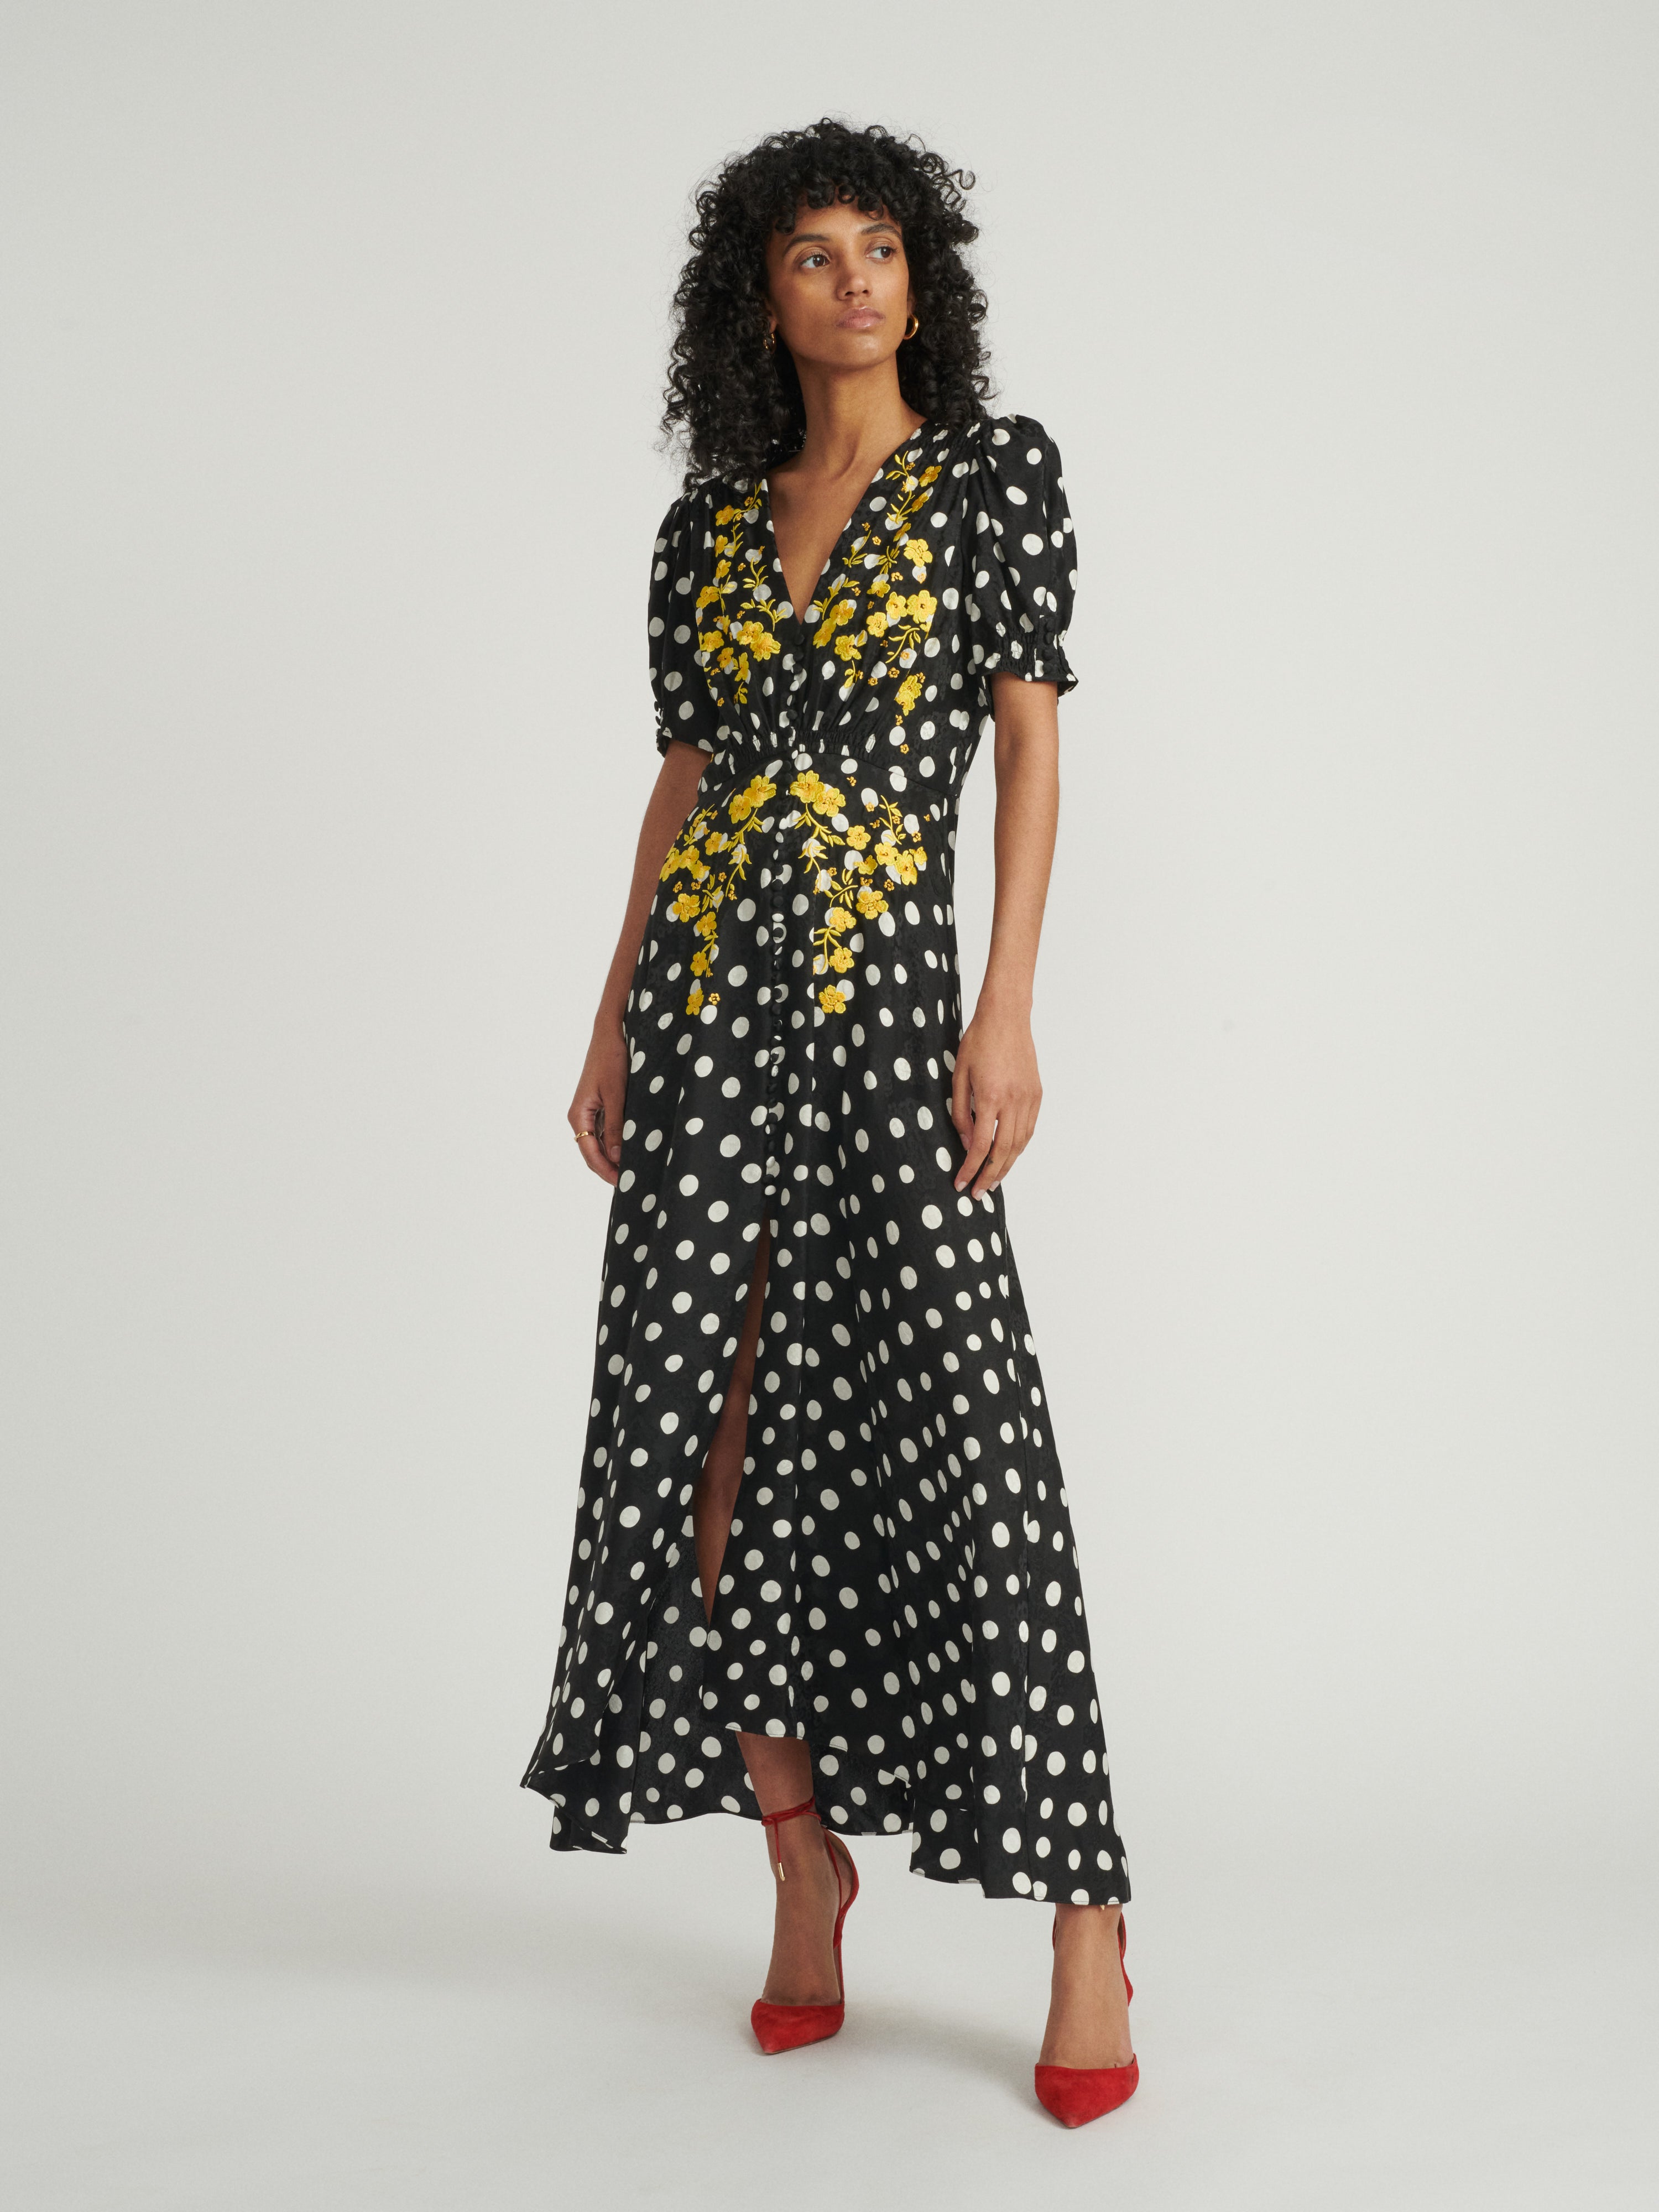 Lea Long Dress in Polka Dot Embroidered